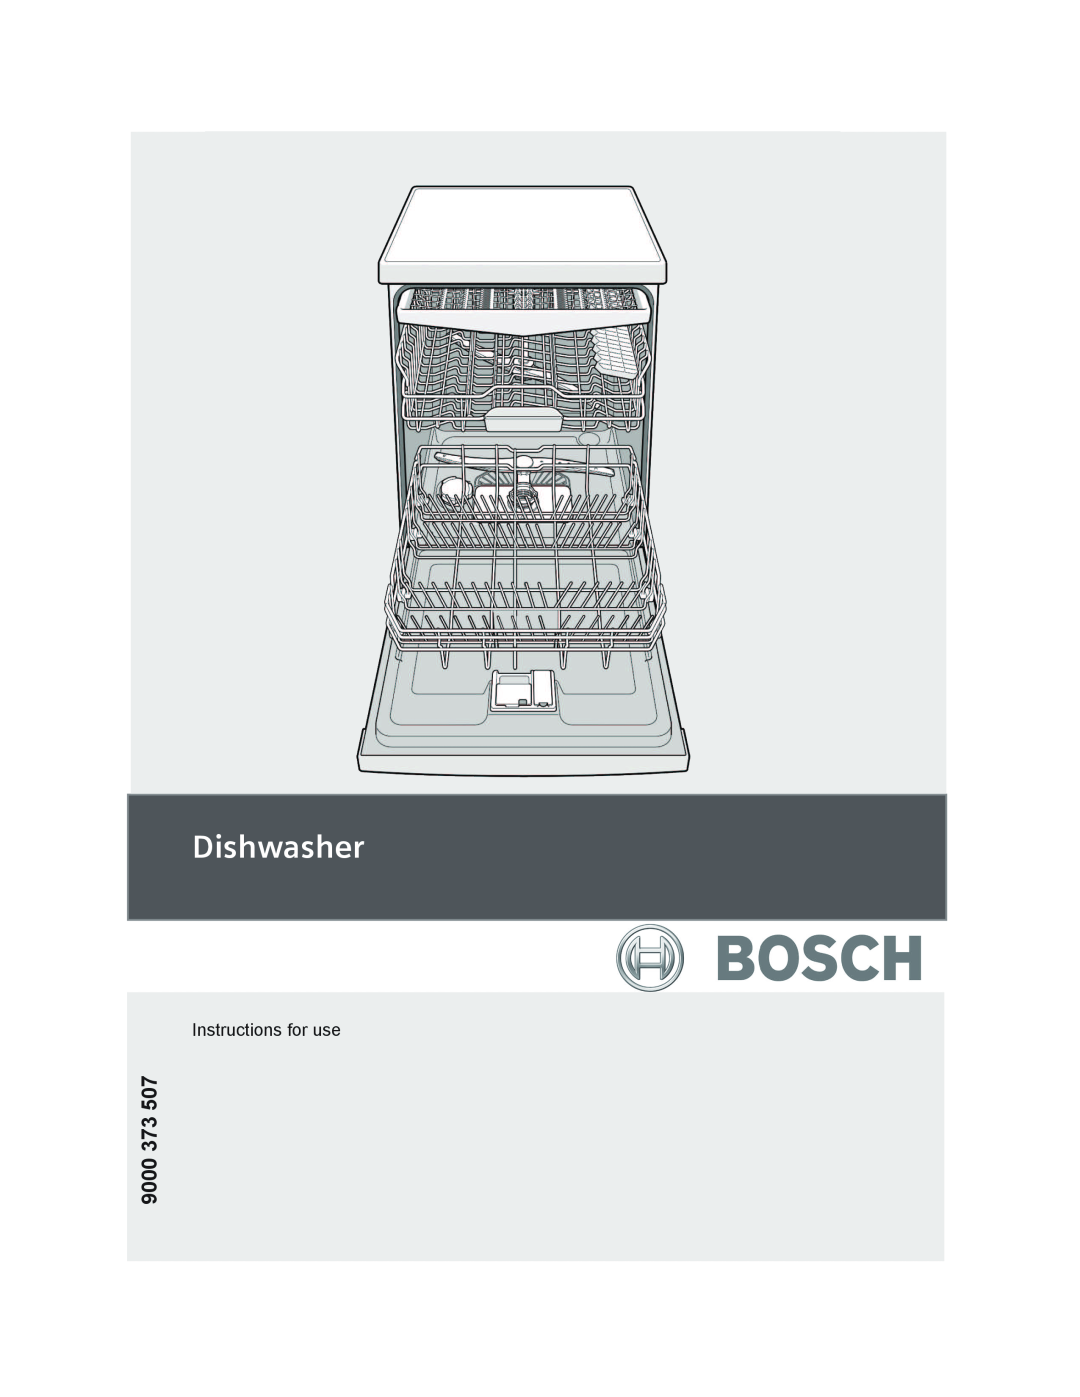 Bosch Appliances 9000373507 manual Dishwasher, Instructions for use 